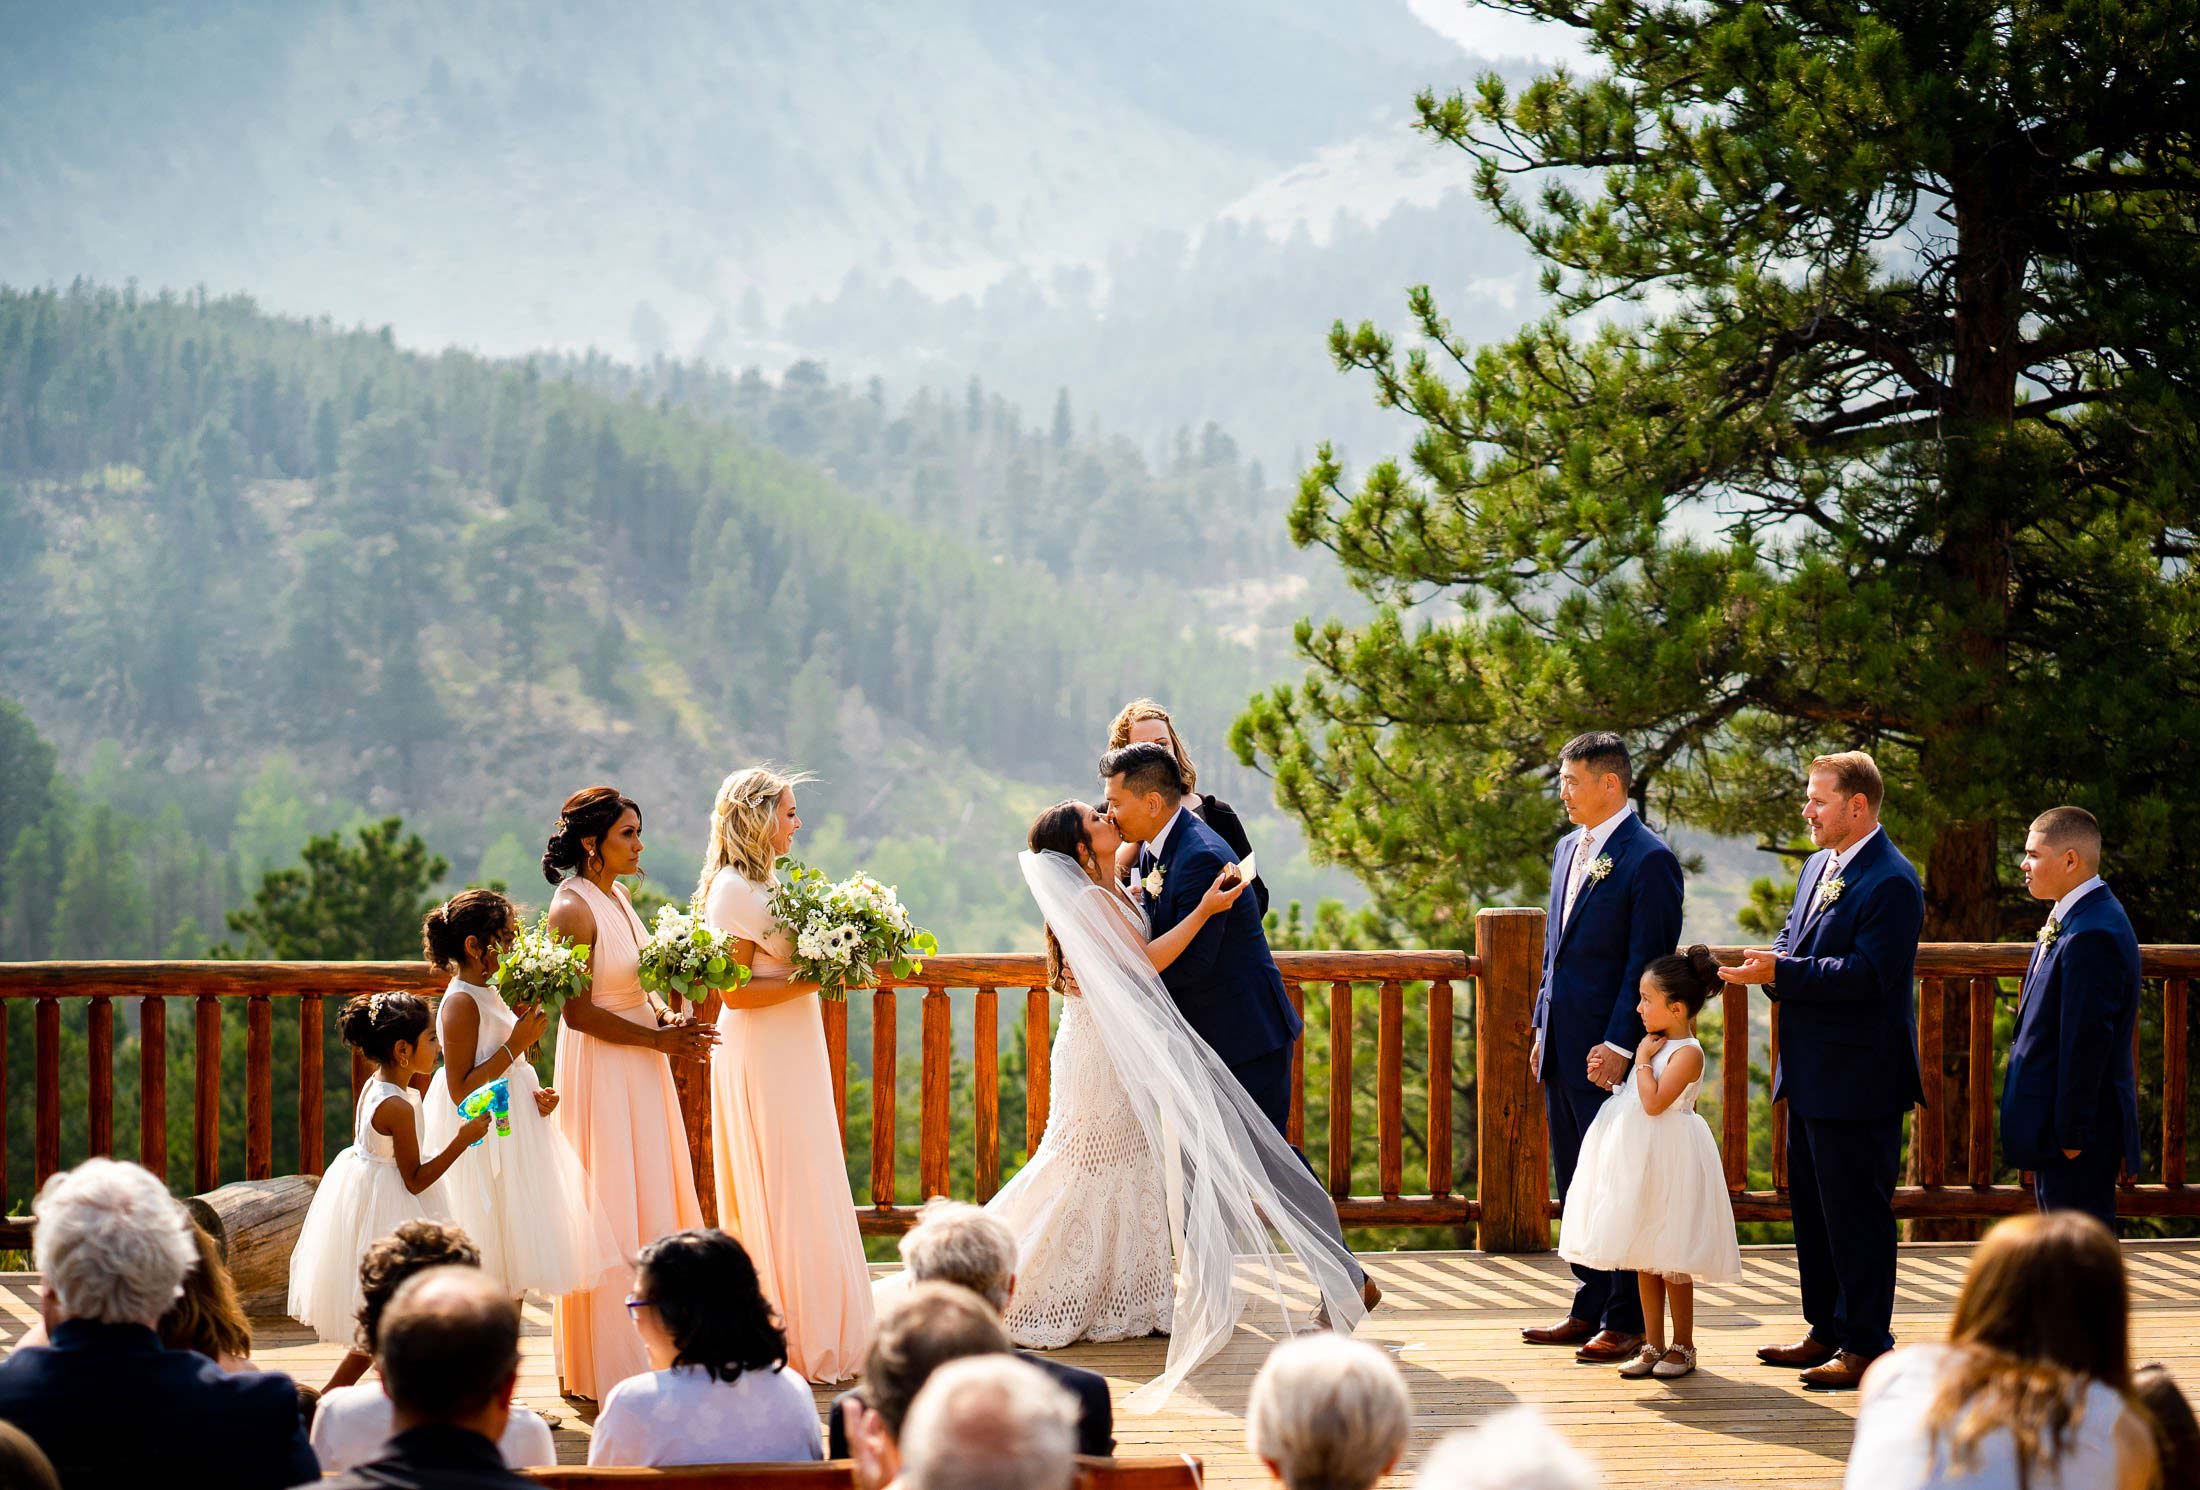 Bride and groom share their first kiss during their wedding ceremony in the mountains as their wedding party cheers and celebrates, wedding photos, wedding photography, wedding photographer, wedding inspiration, wedding photo inspiration, mountain wedding, YMCA of the Rockies wedding, YMCA of the Rockies wedding photos, YMCA of the Rockies wedding photography, YMCA of the Rockies wedding photographer, YMCA of the Rockies wedding inspiration, YMCA of the Rockies wedding venue, Estes Park wedding, Estes Park wedding photos, Estes Park wedding photography, Estes Park wedding photographer, Colorado wedding, Colorado wedding photos, Colorado wedding photography, Colorado wedding photographer, Colorado mountain wedding, Colorado wedding inspiration